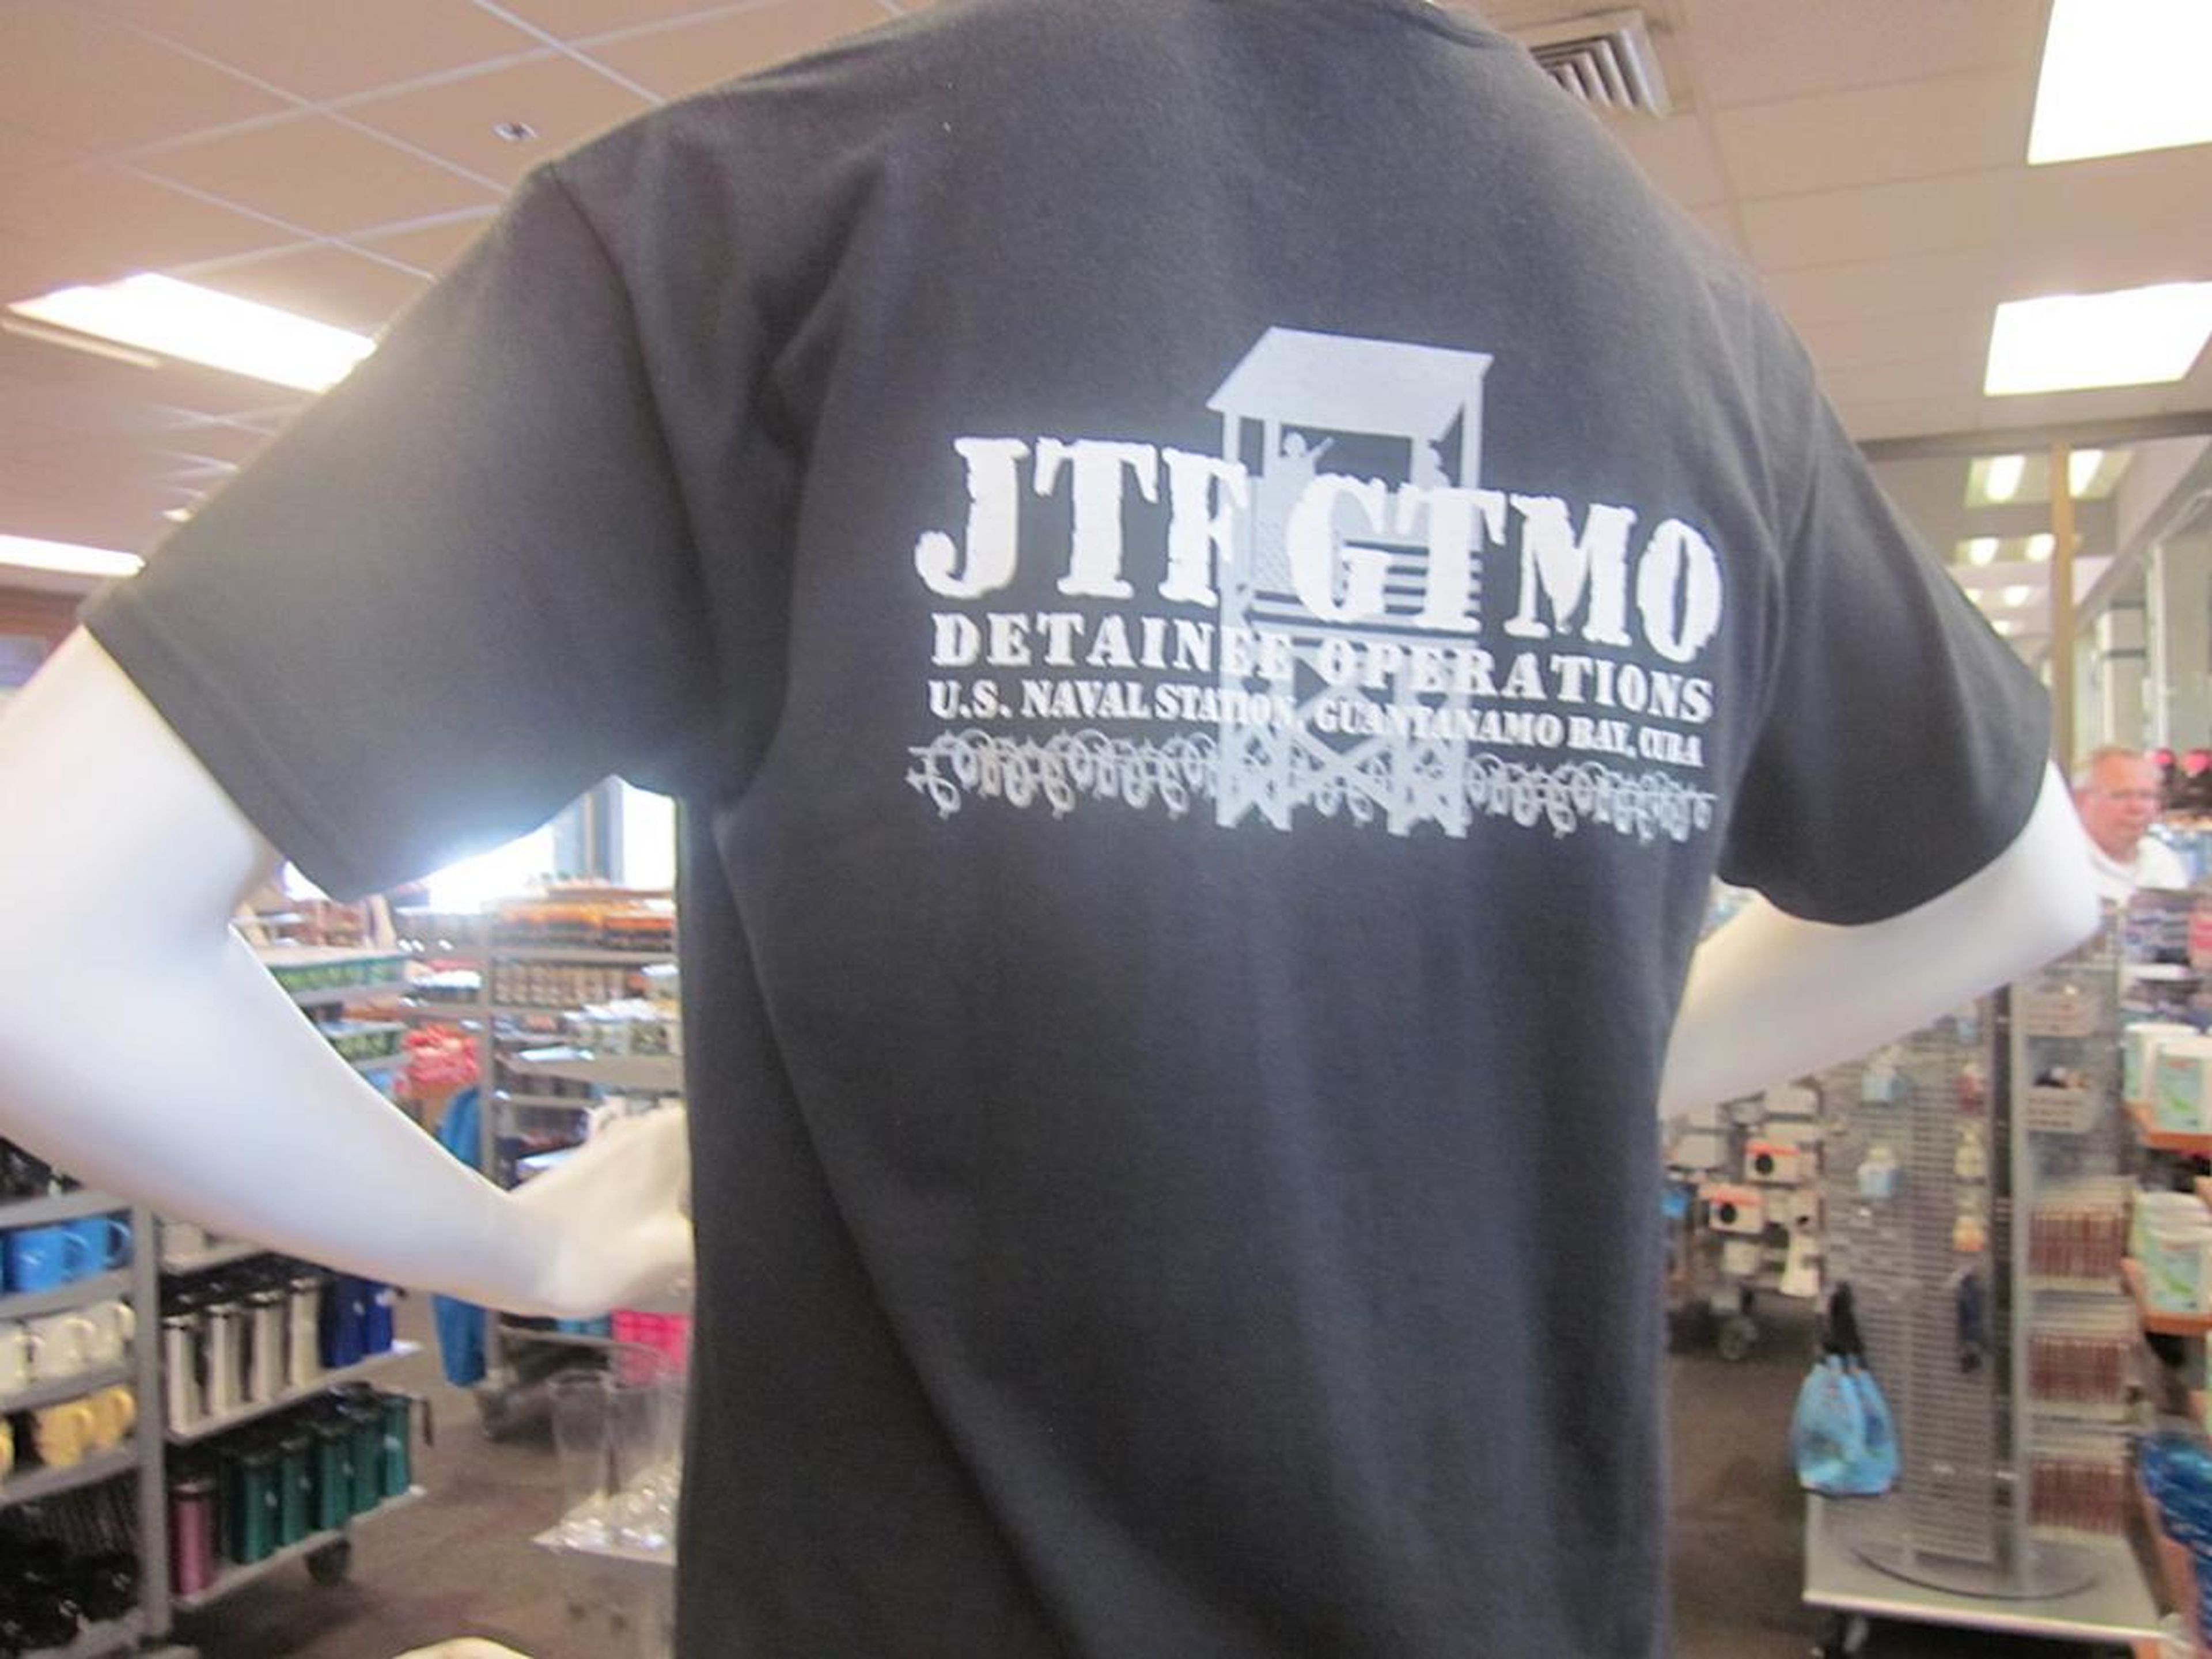 Even though Mirk said most of the base's residents try not to bring up the detention camp, it looks like the shop doesn't mind mentioning it. This T-shirt with the words "JTF [Joint Task Force] GTMO Detention Operations"